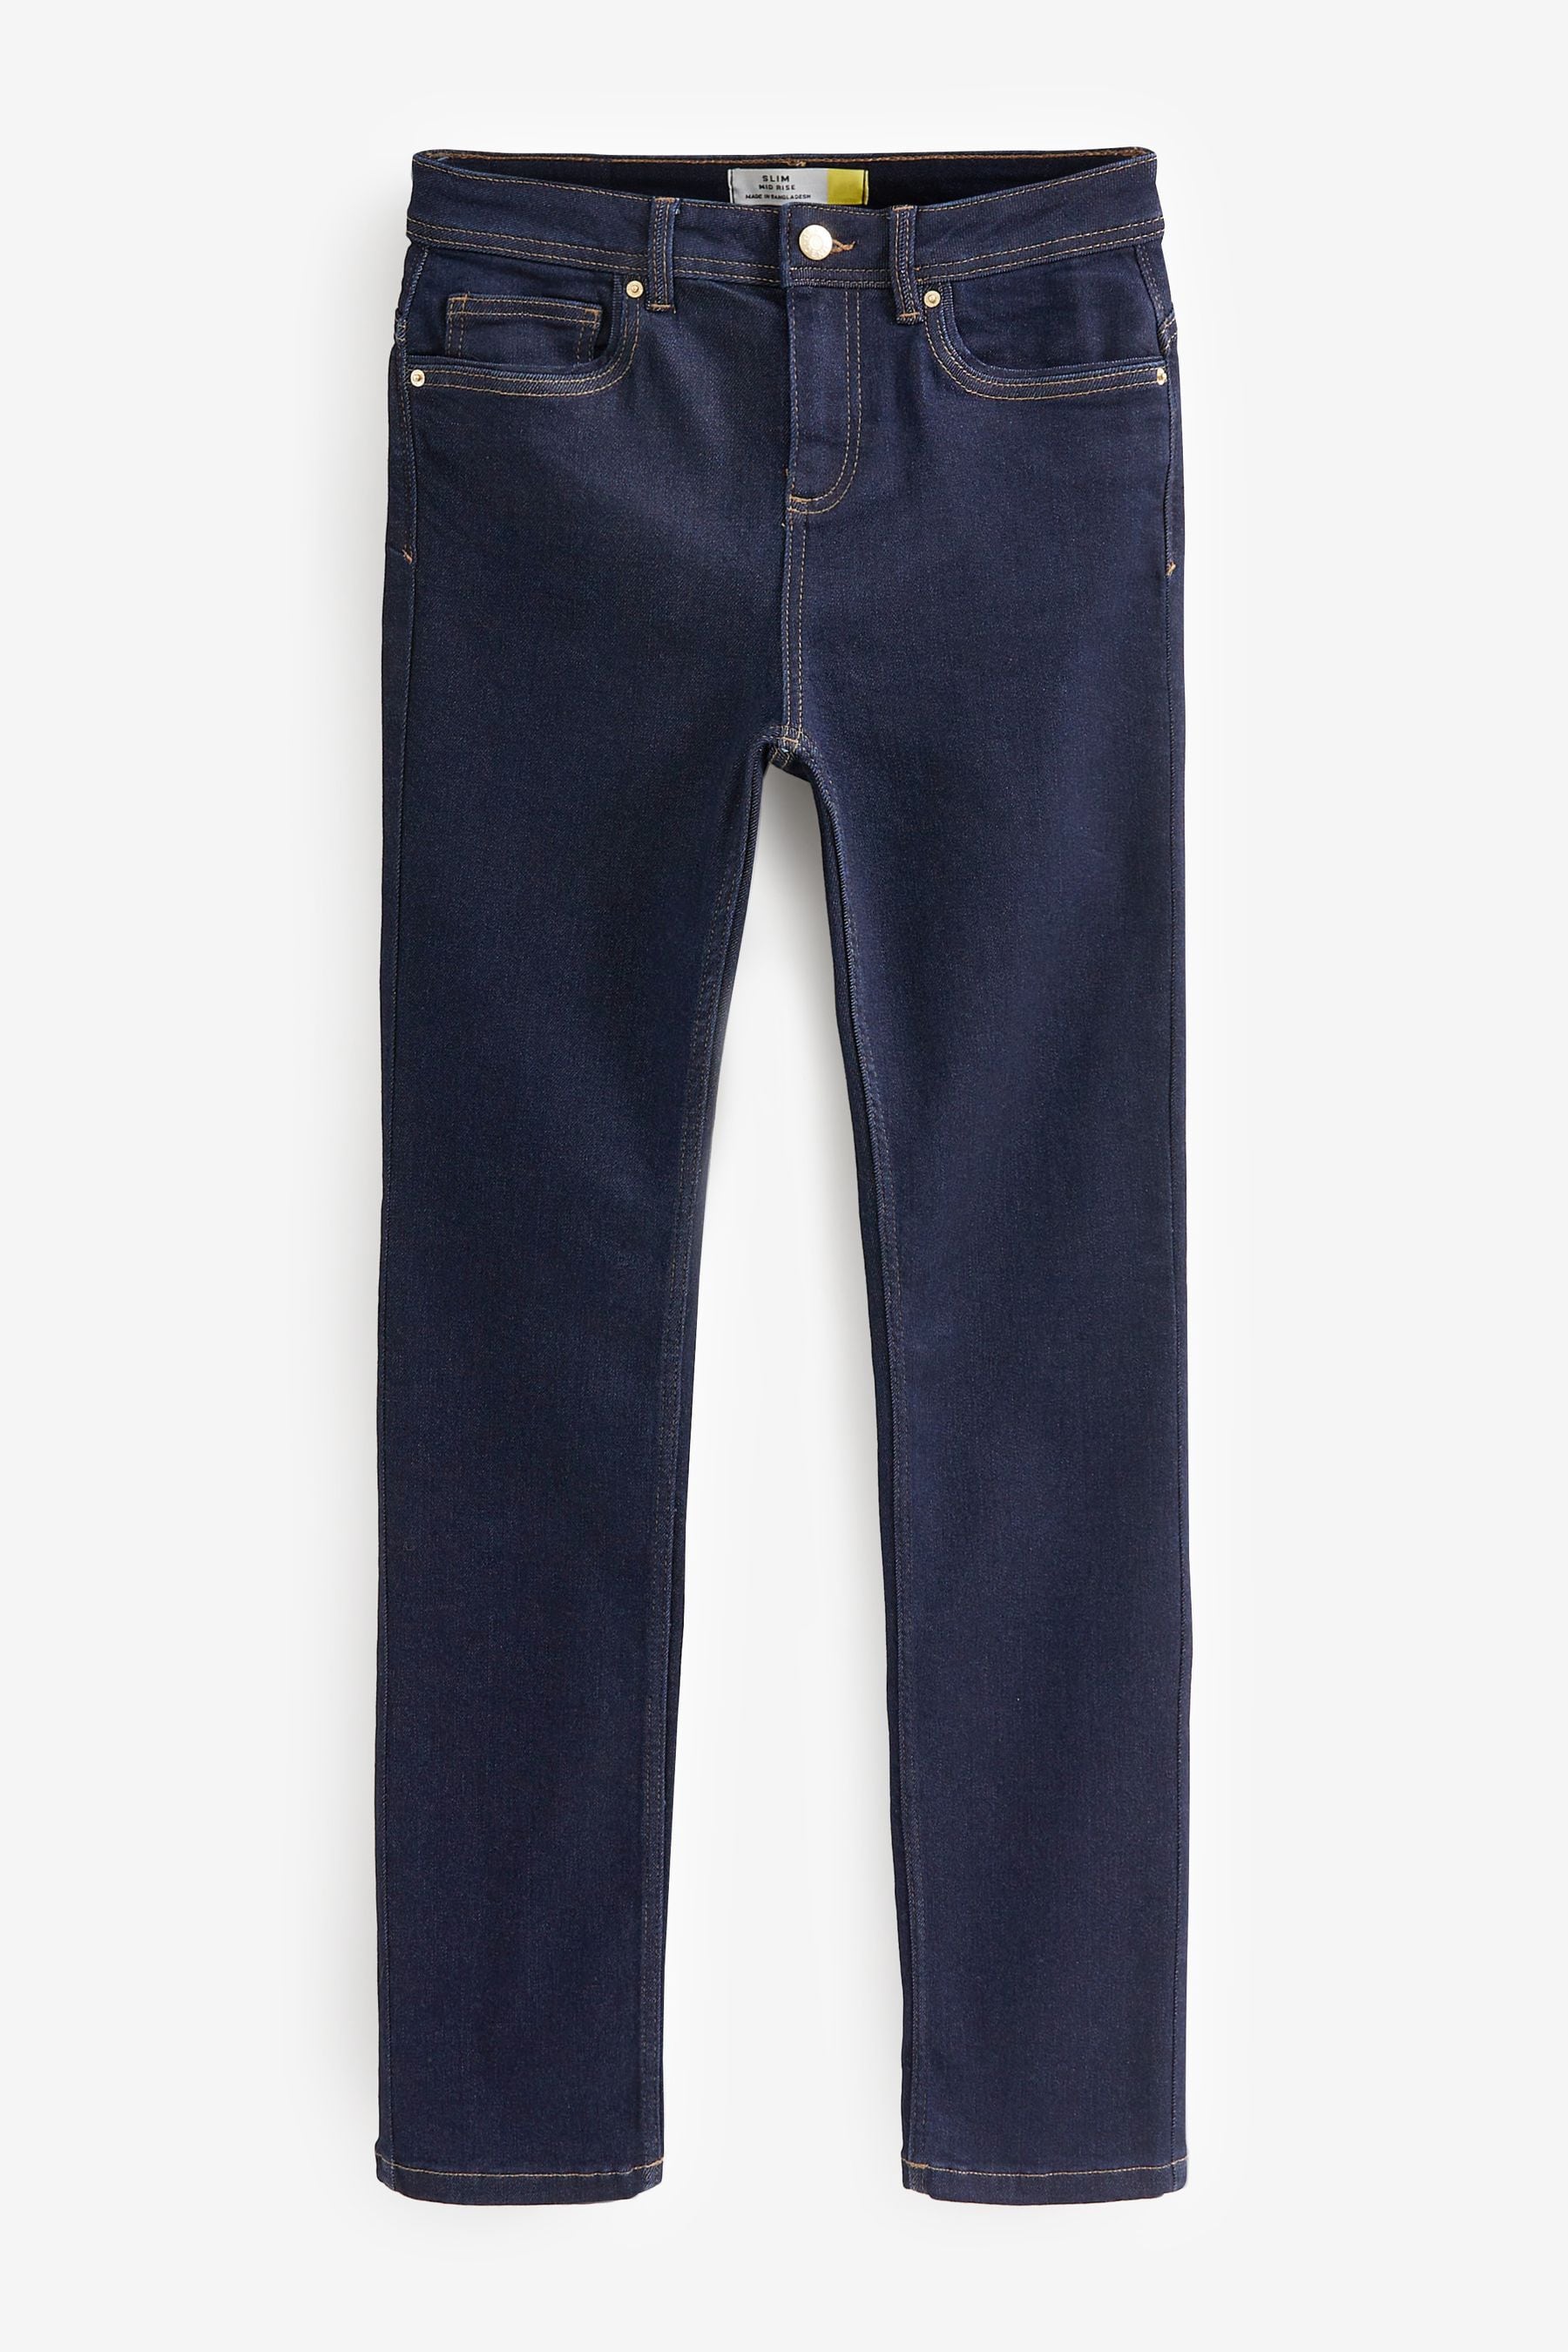 Buy Rinse Blue Slim Supersoft Jeans from Next Ireland